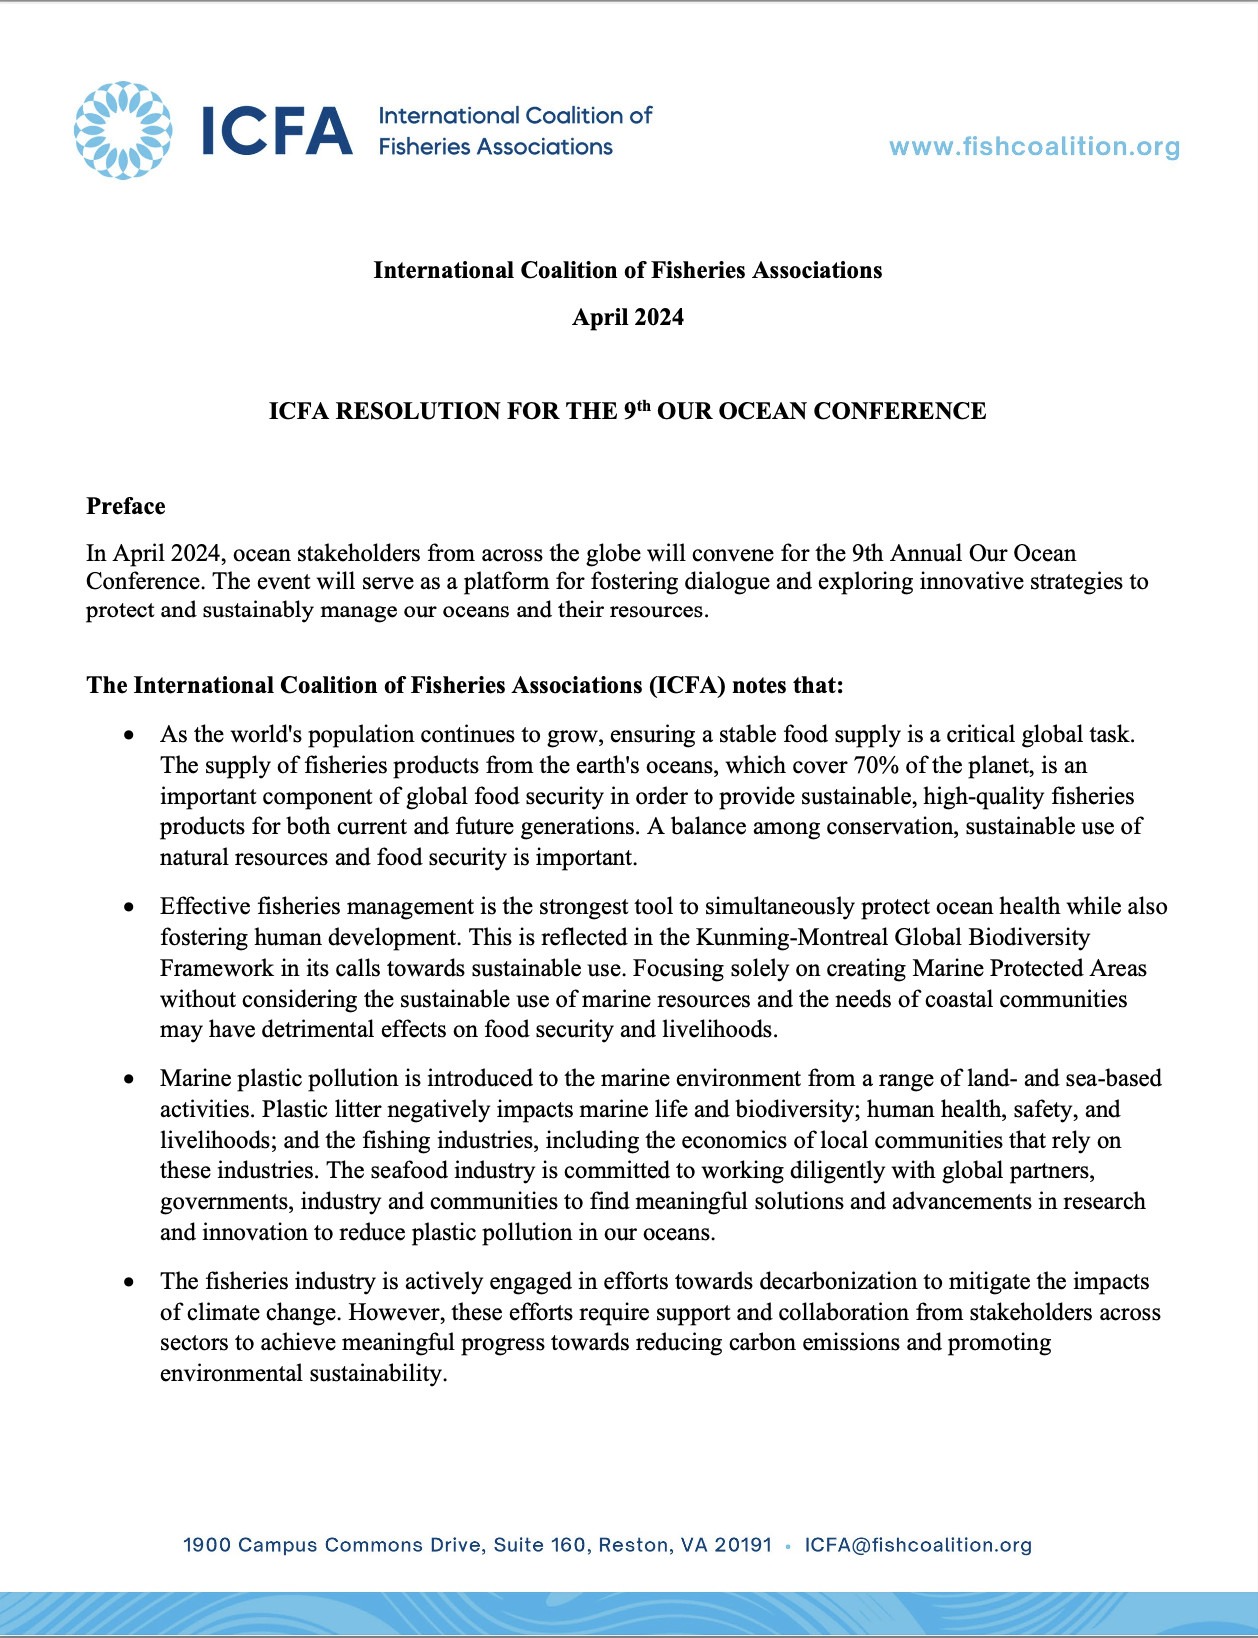 ICFA Resolution for the 9th Our Ocean Conference 